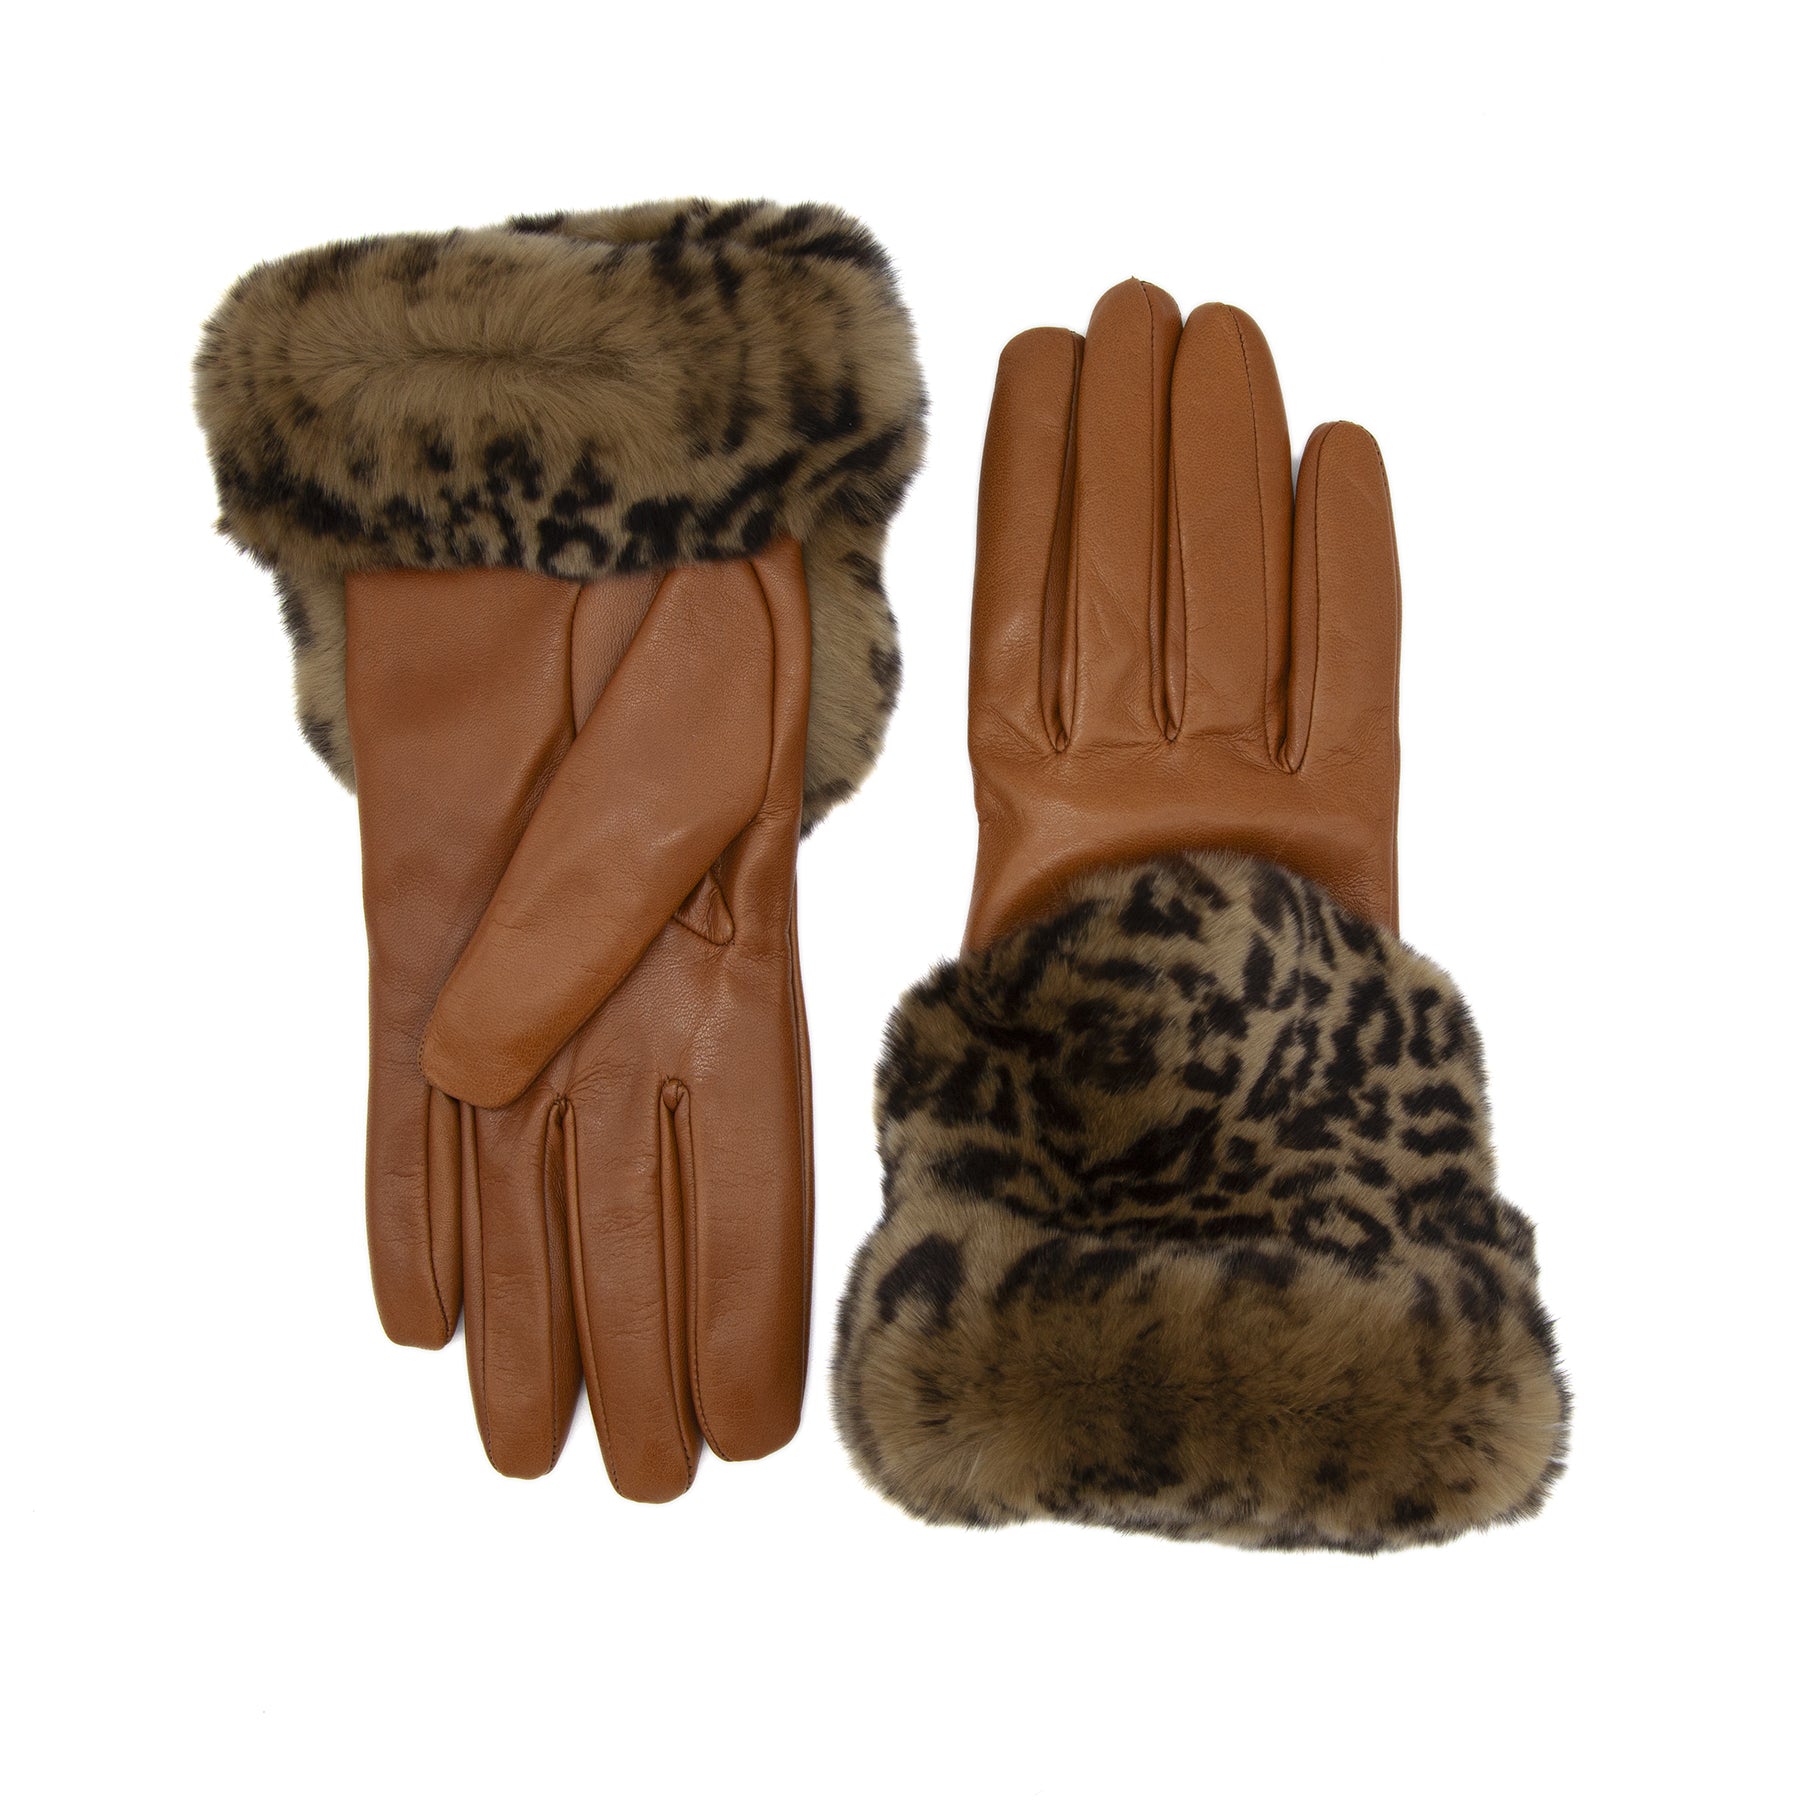 Women's camel nappa leather gloves with a printed leo wide real fur panel on the top and cashmere lined